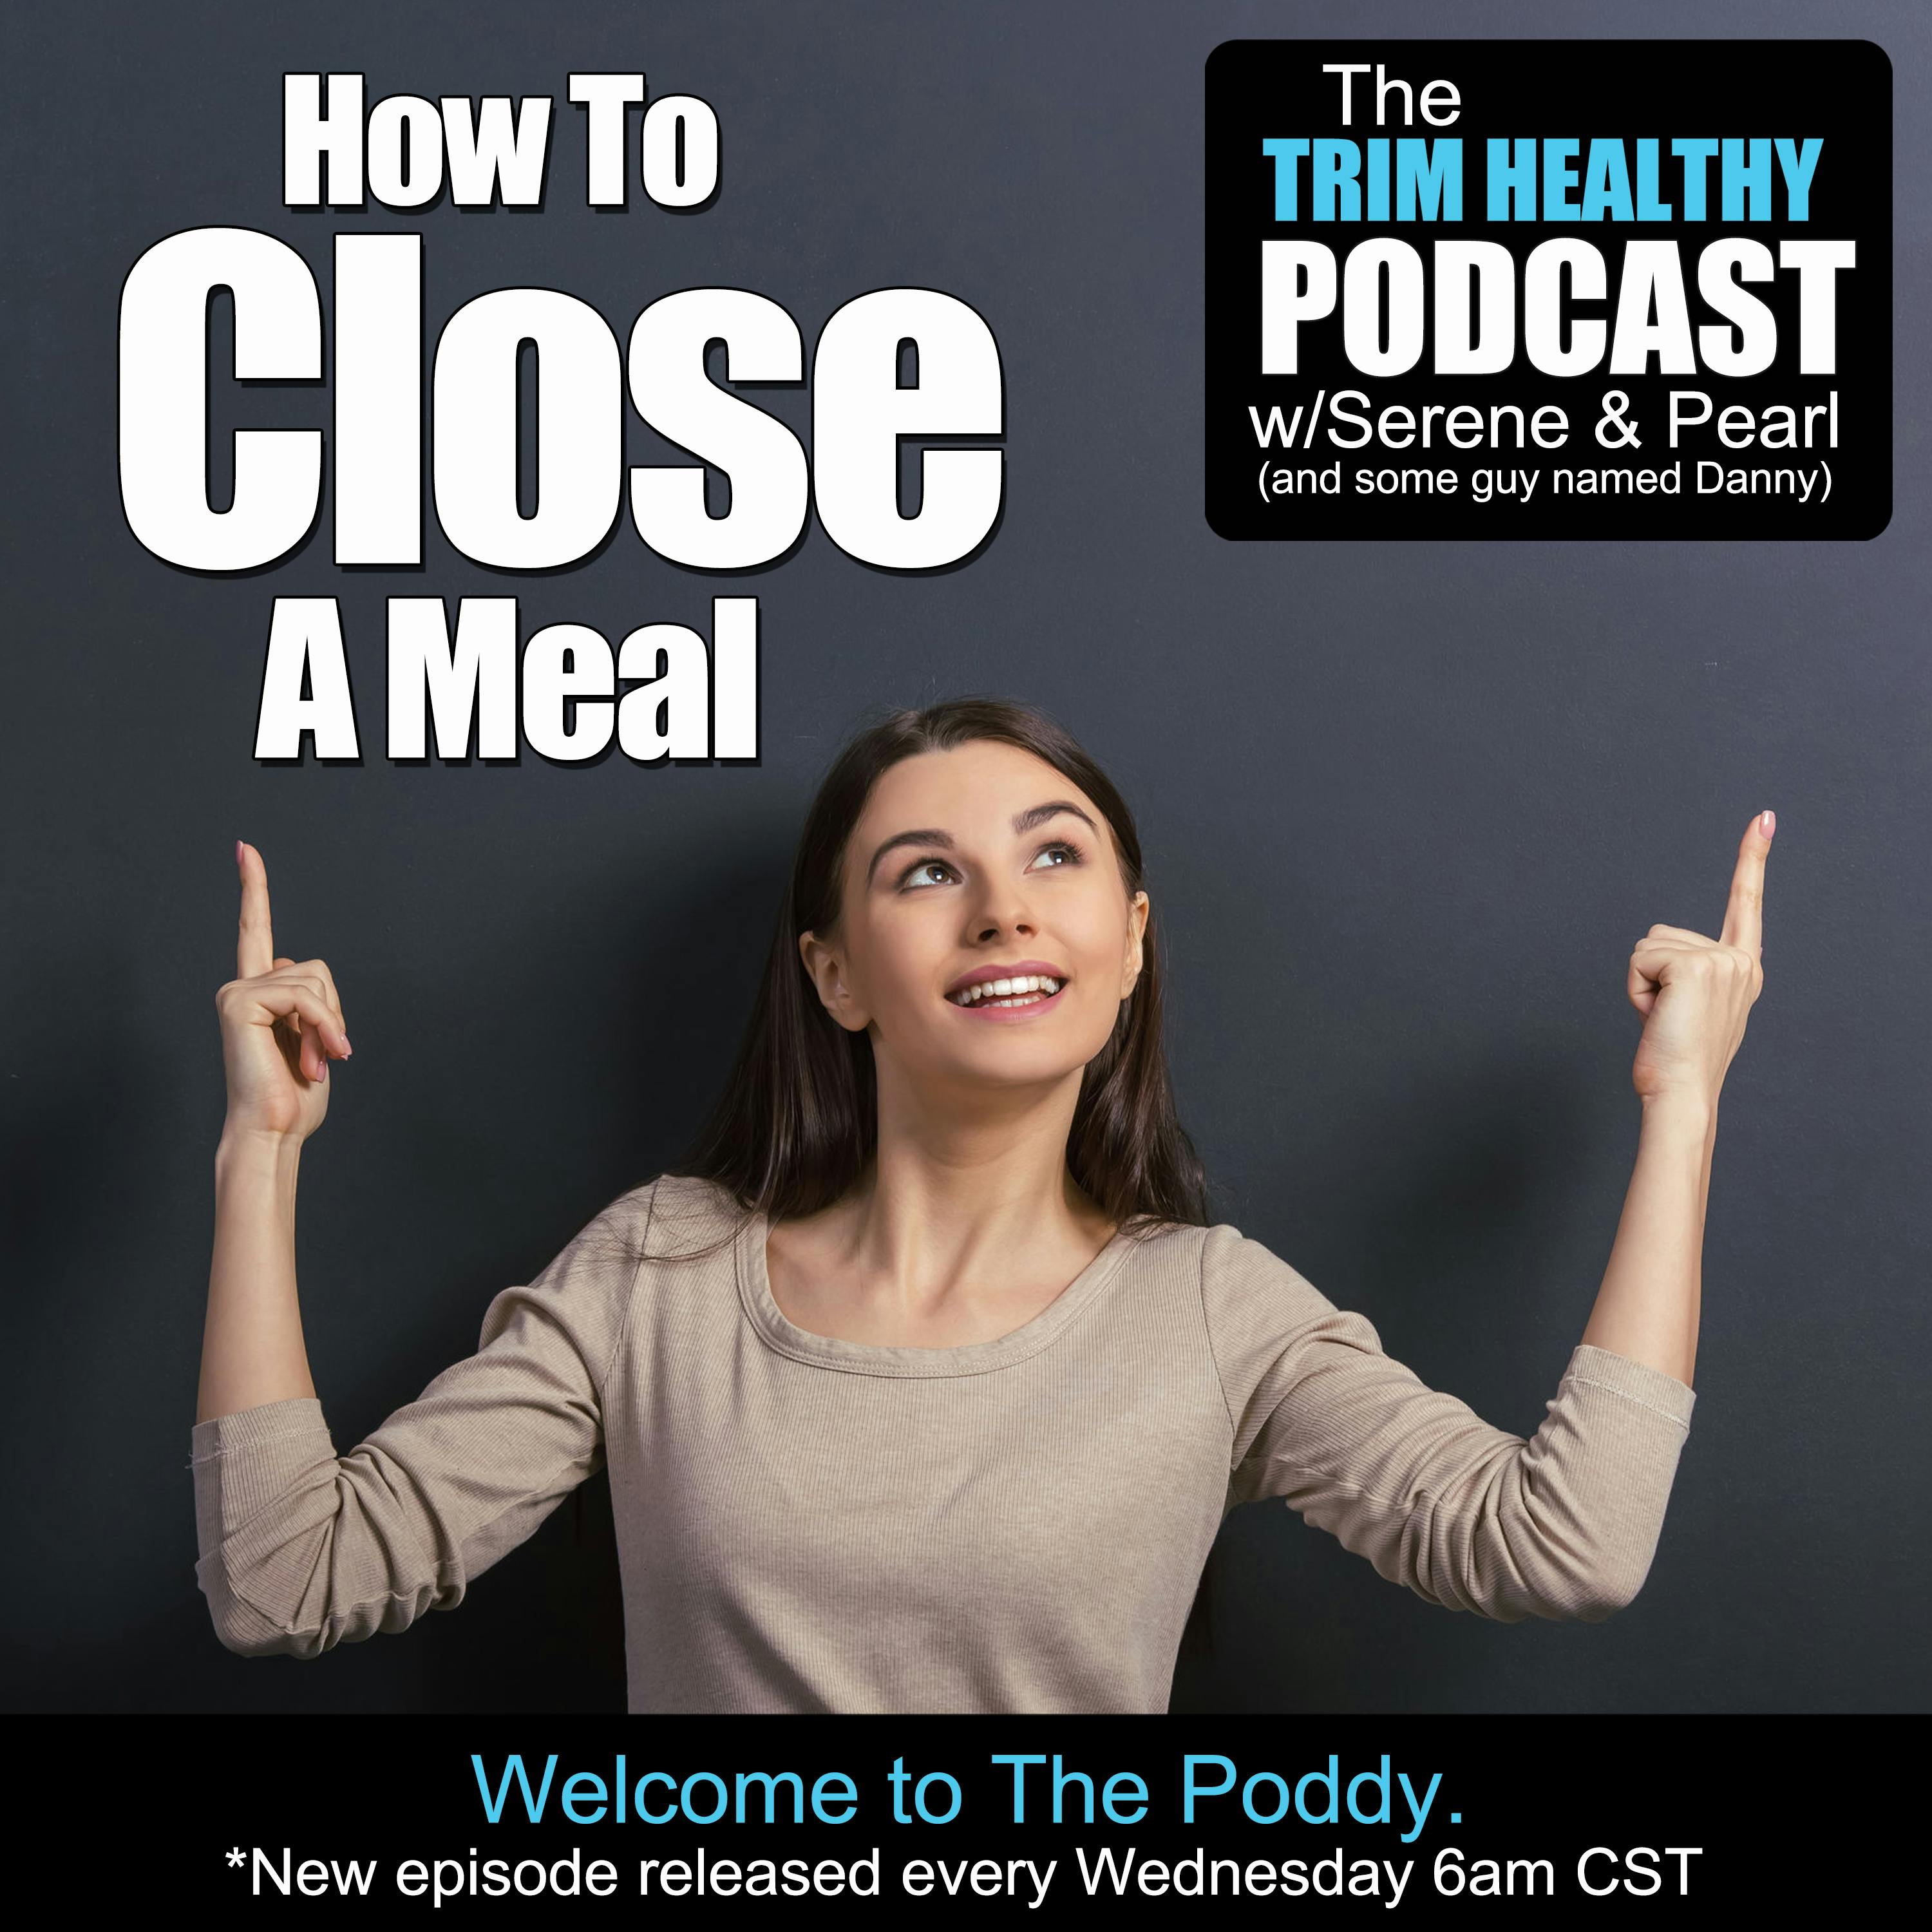 Ep 155: How To Close A Meal